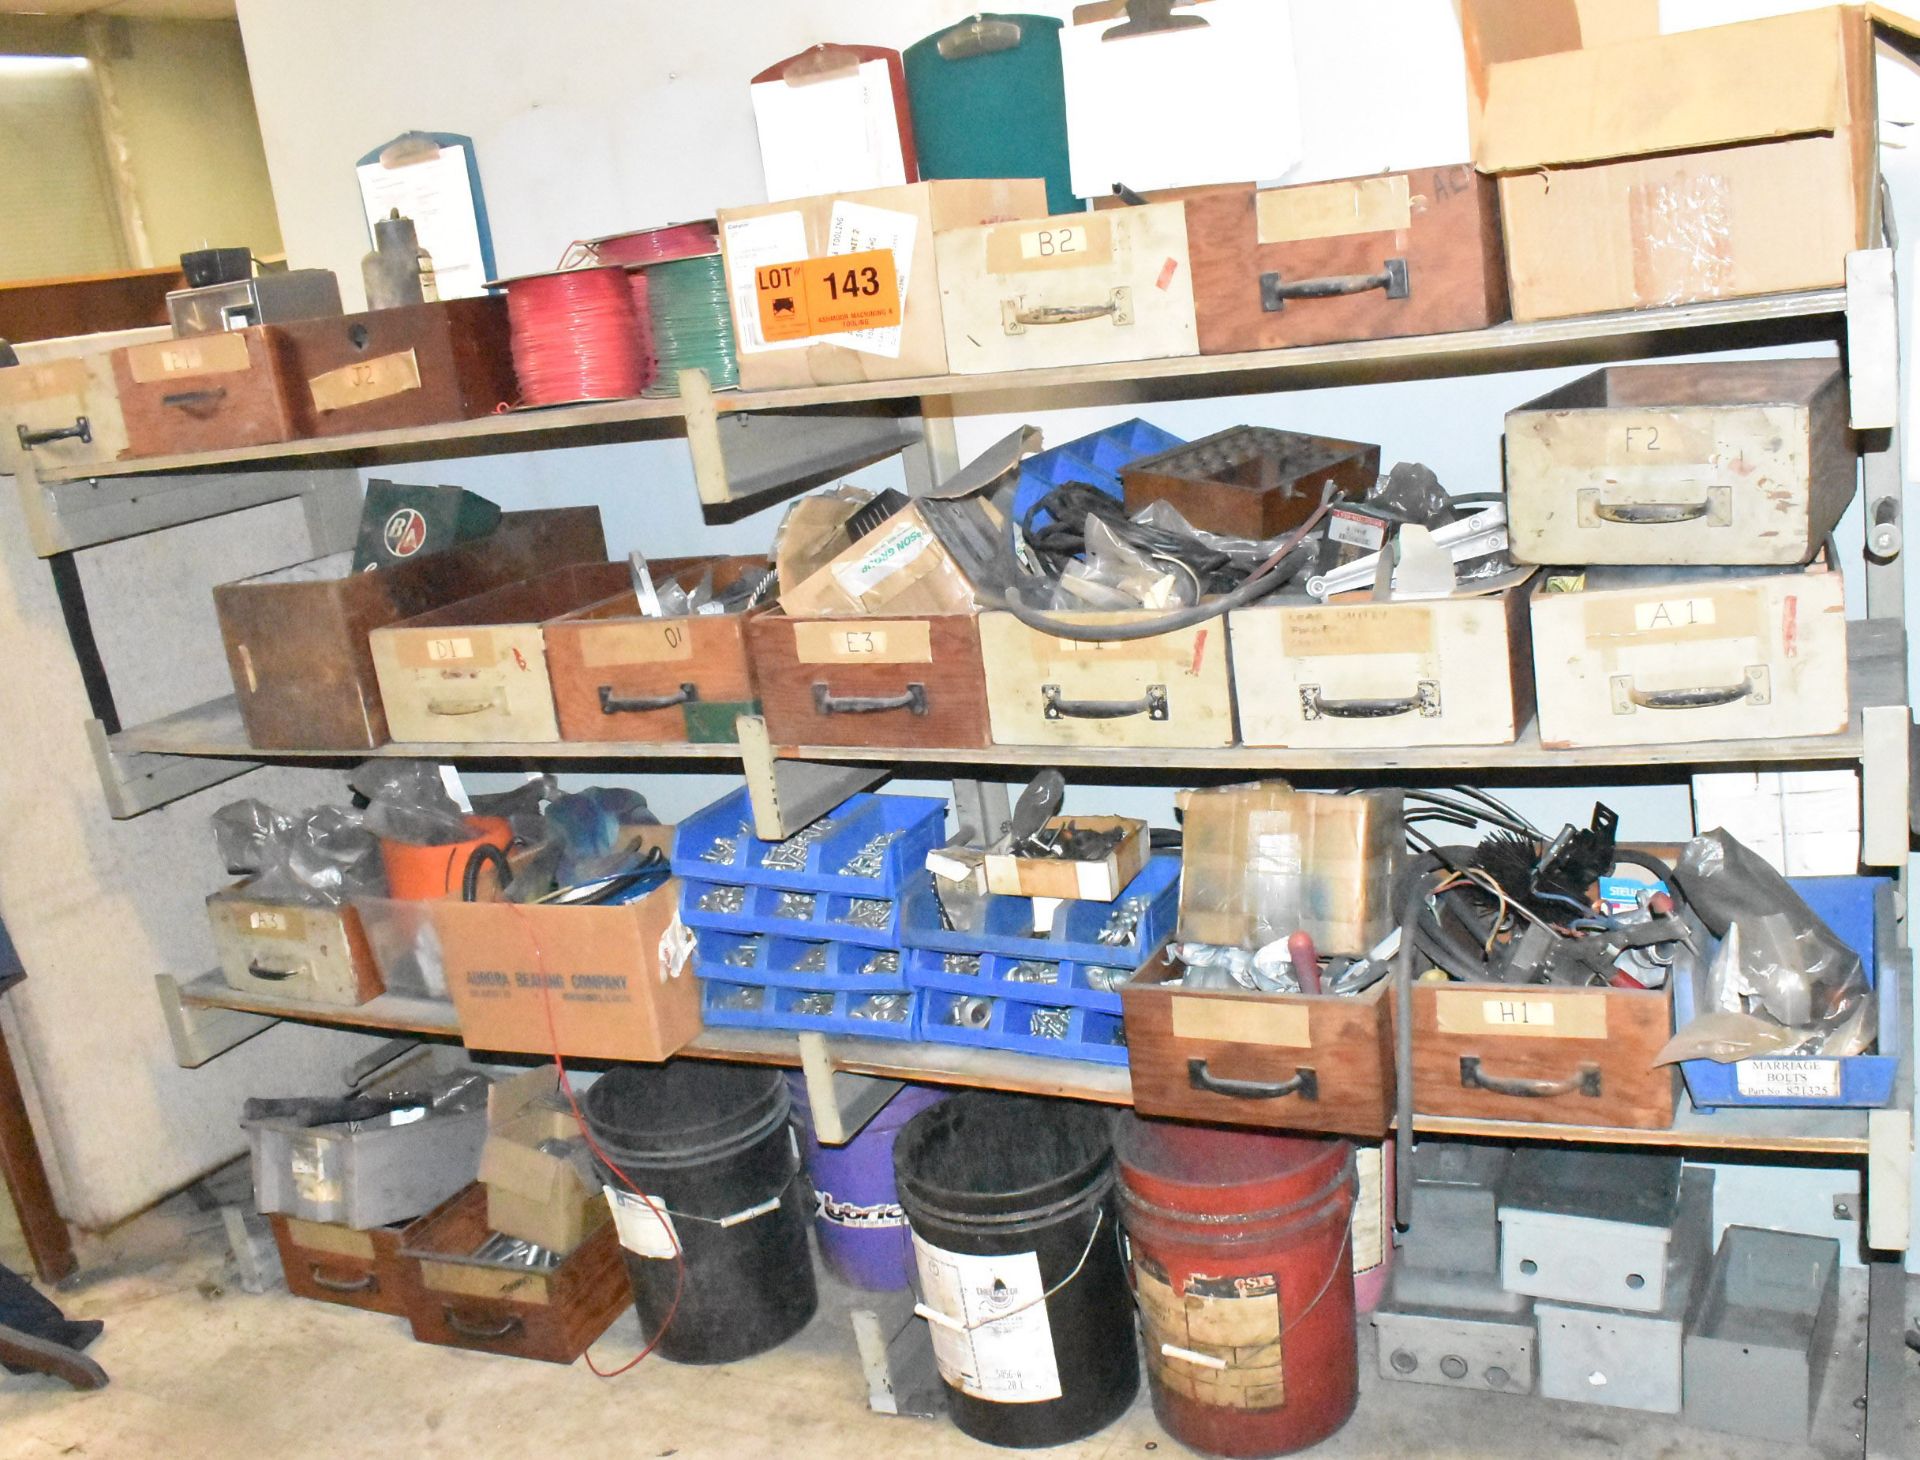 LOT/ SHELVES WITH CONTENTS - INCLUDING SPARE PARTS, SHOP SUPPLIES & HARDWARE